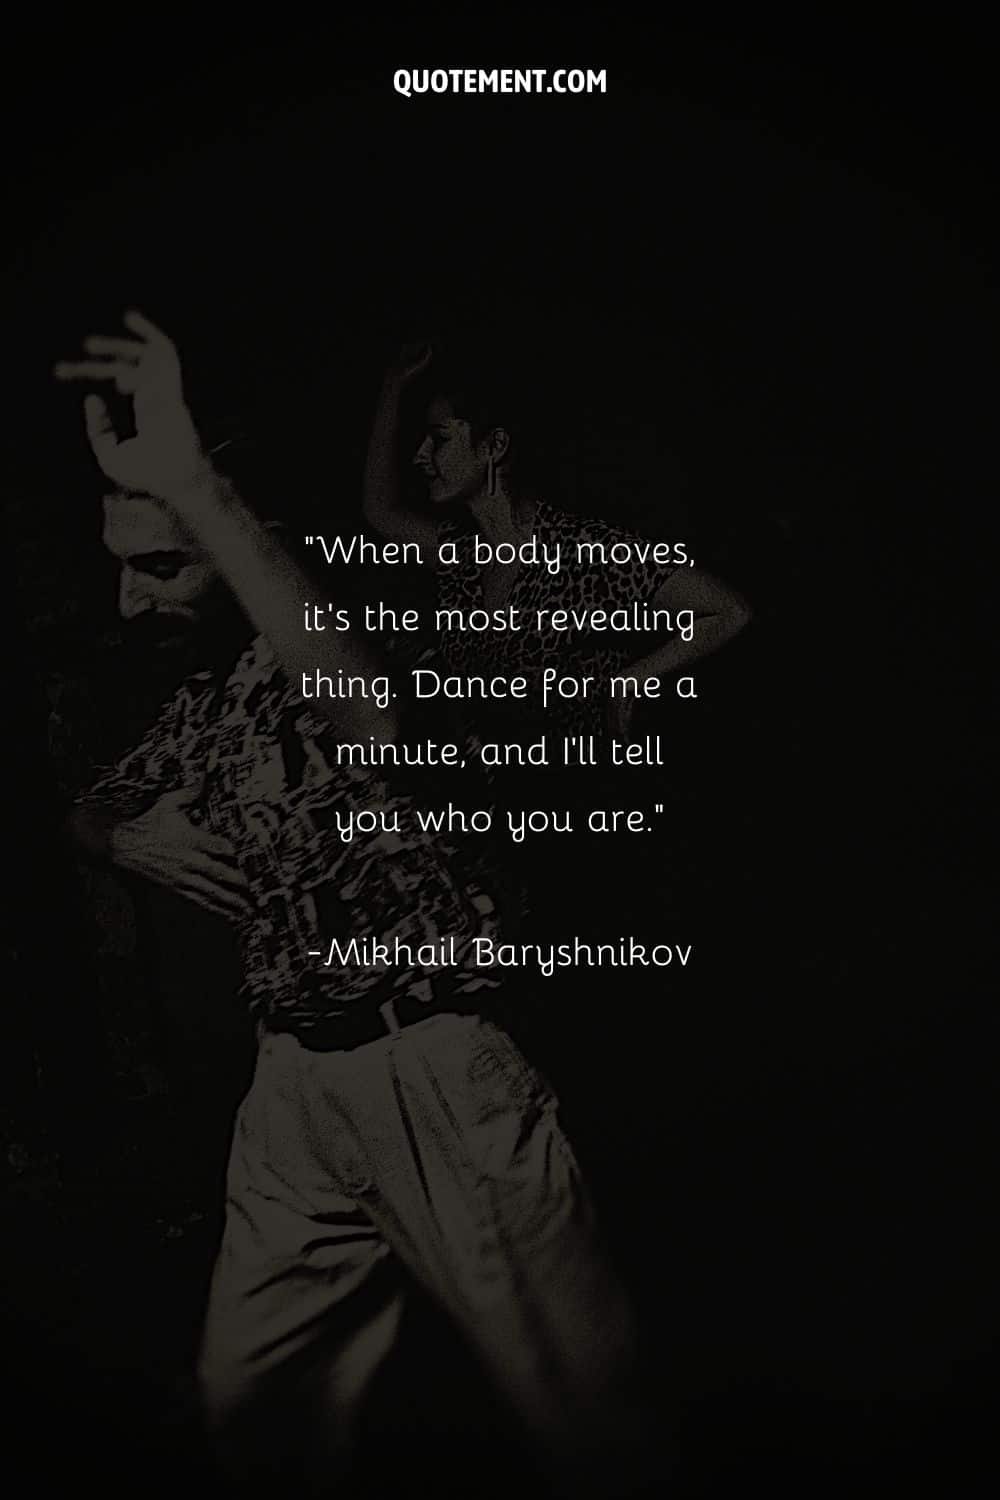 two people dancing in a black background representing dancing quote